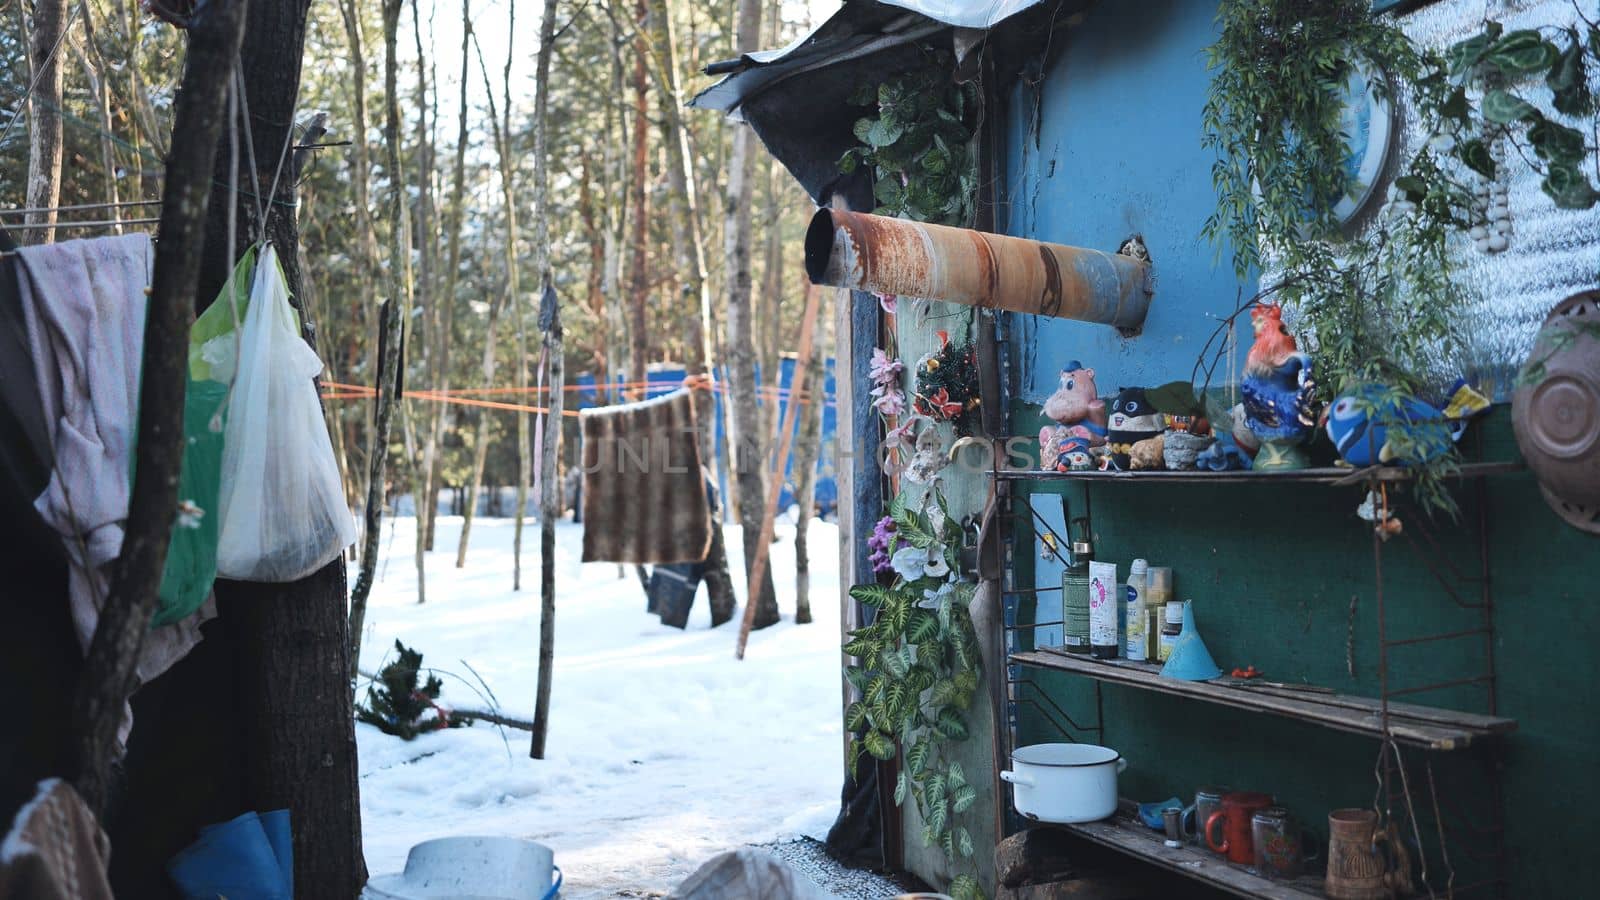 Homeless people go into their huts in the winter in the woods. by DovidPro